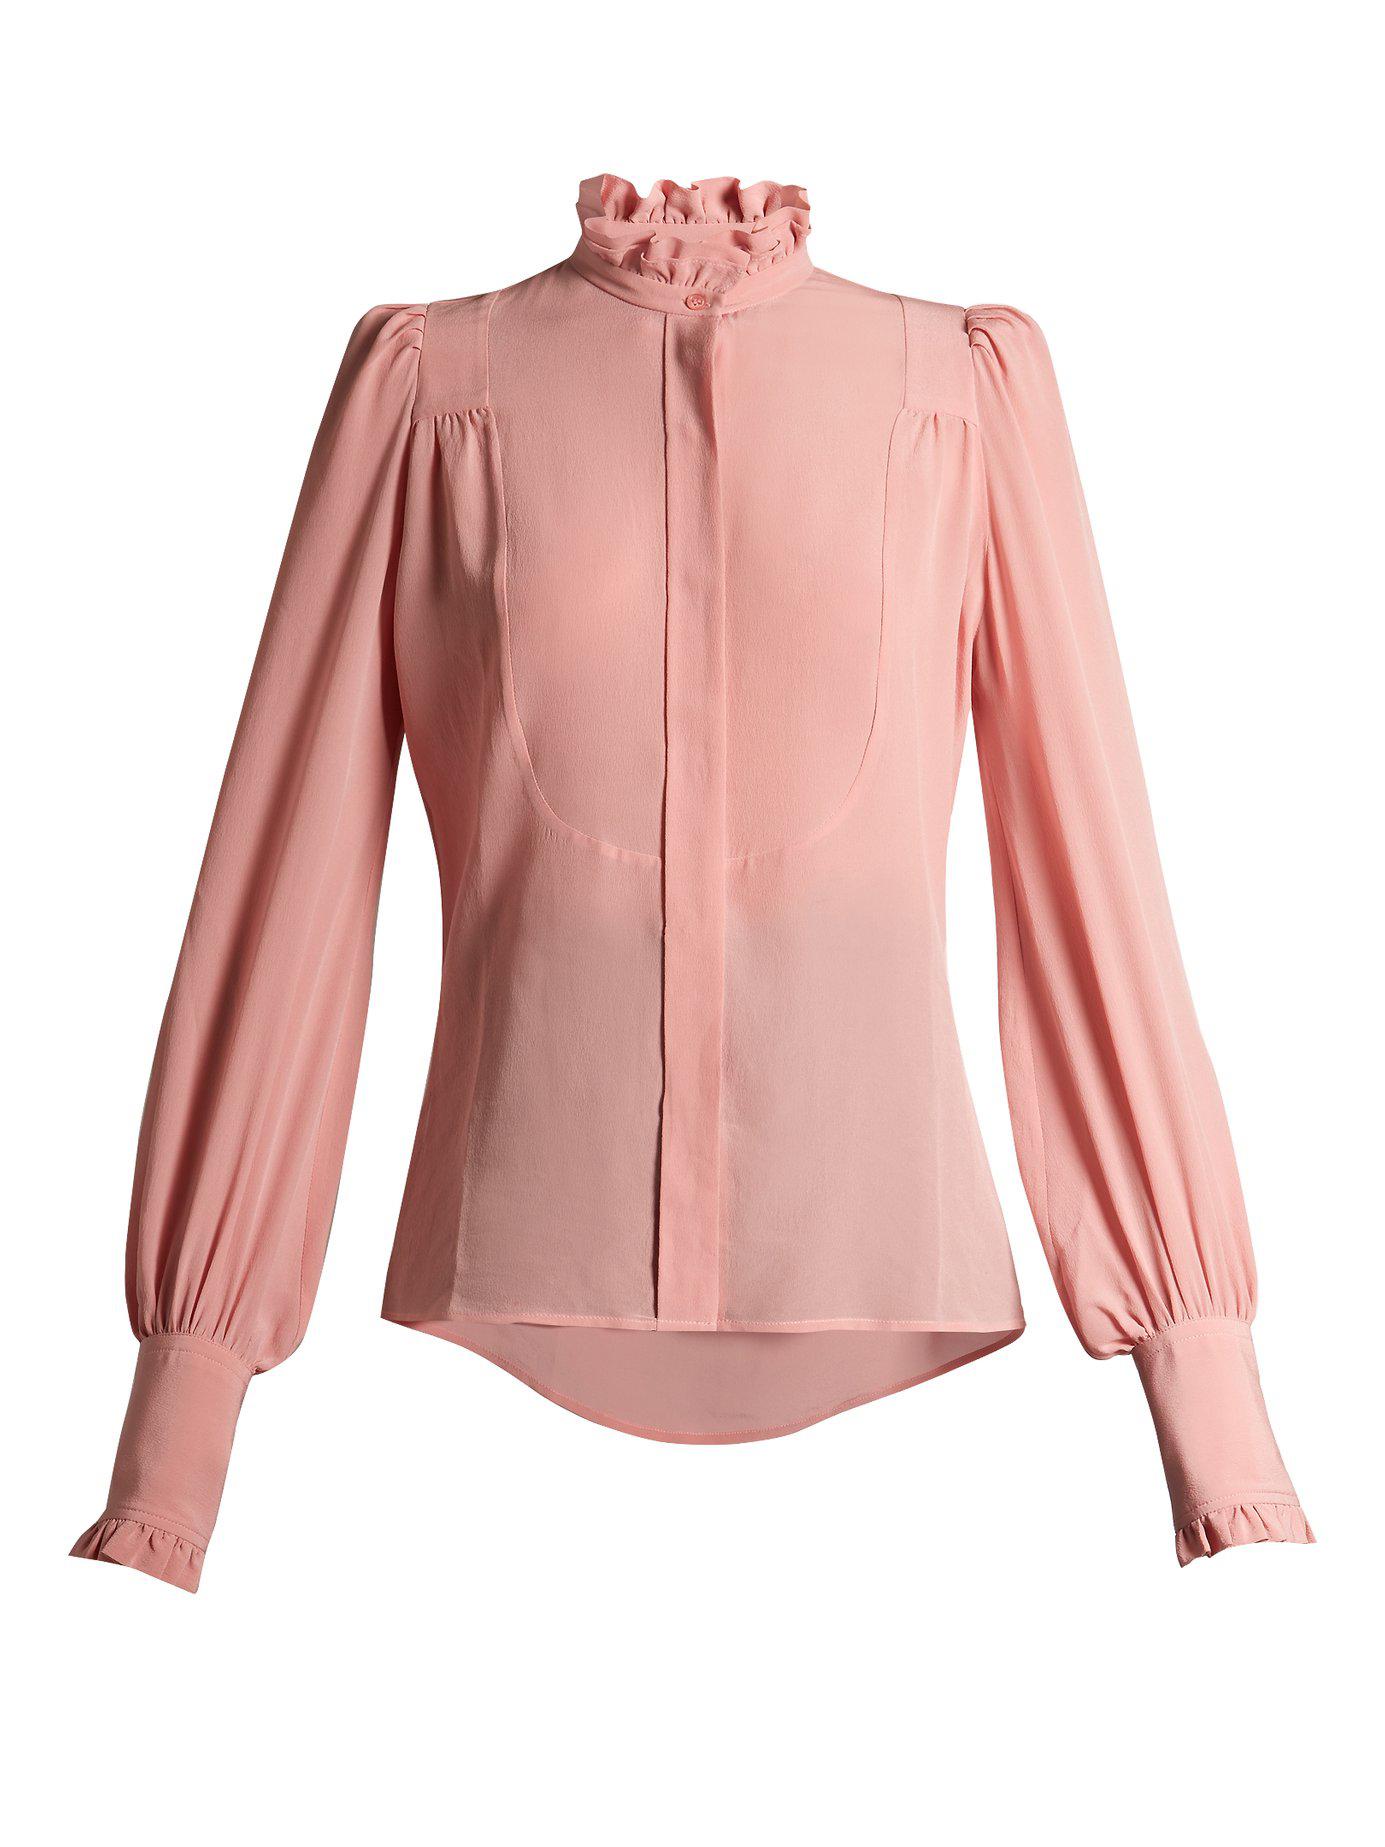 Isabel Marant Sloan Ruffled High-neck Blouse in Light Pink (Pink) - Lyst